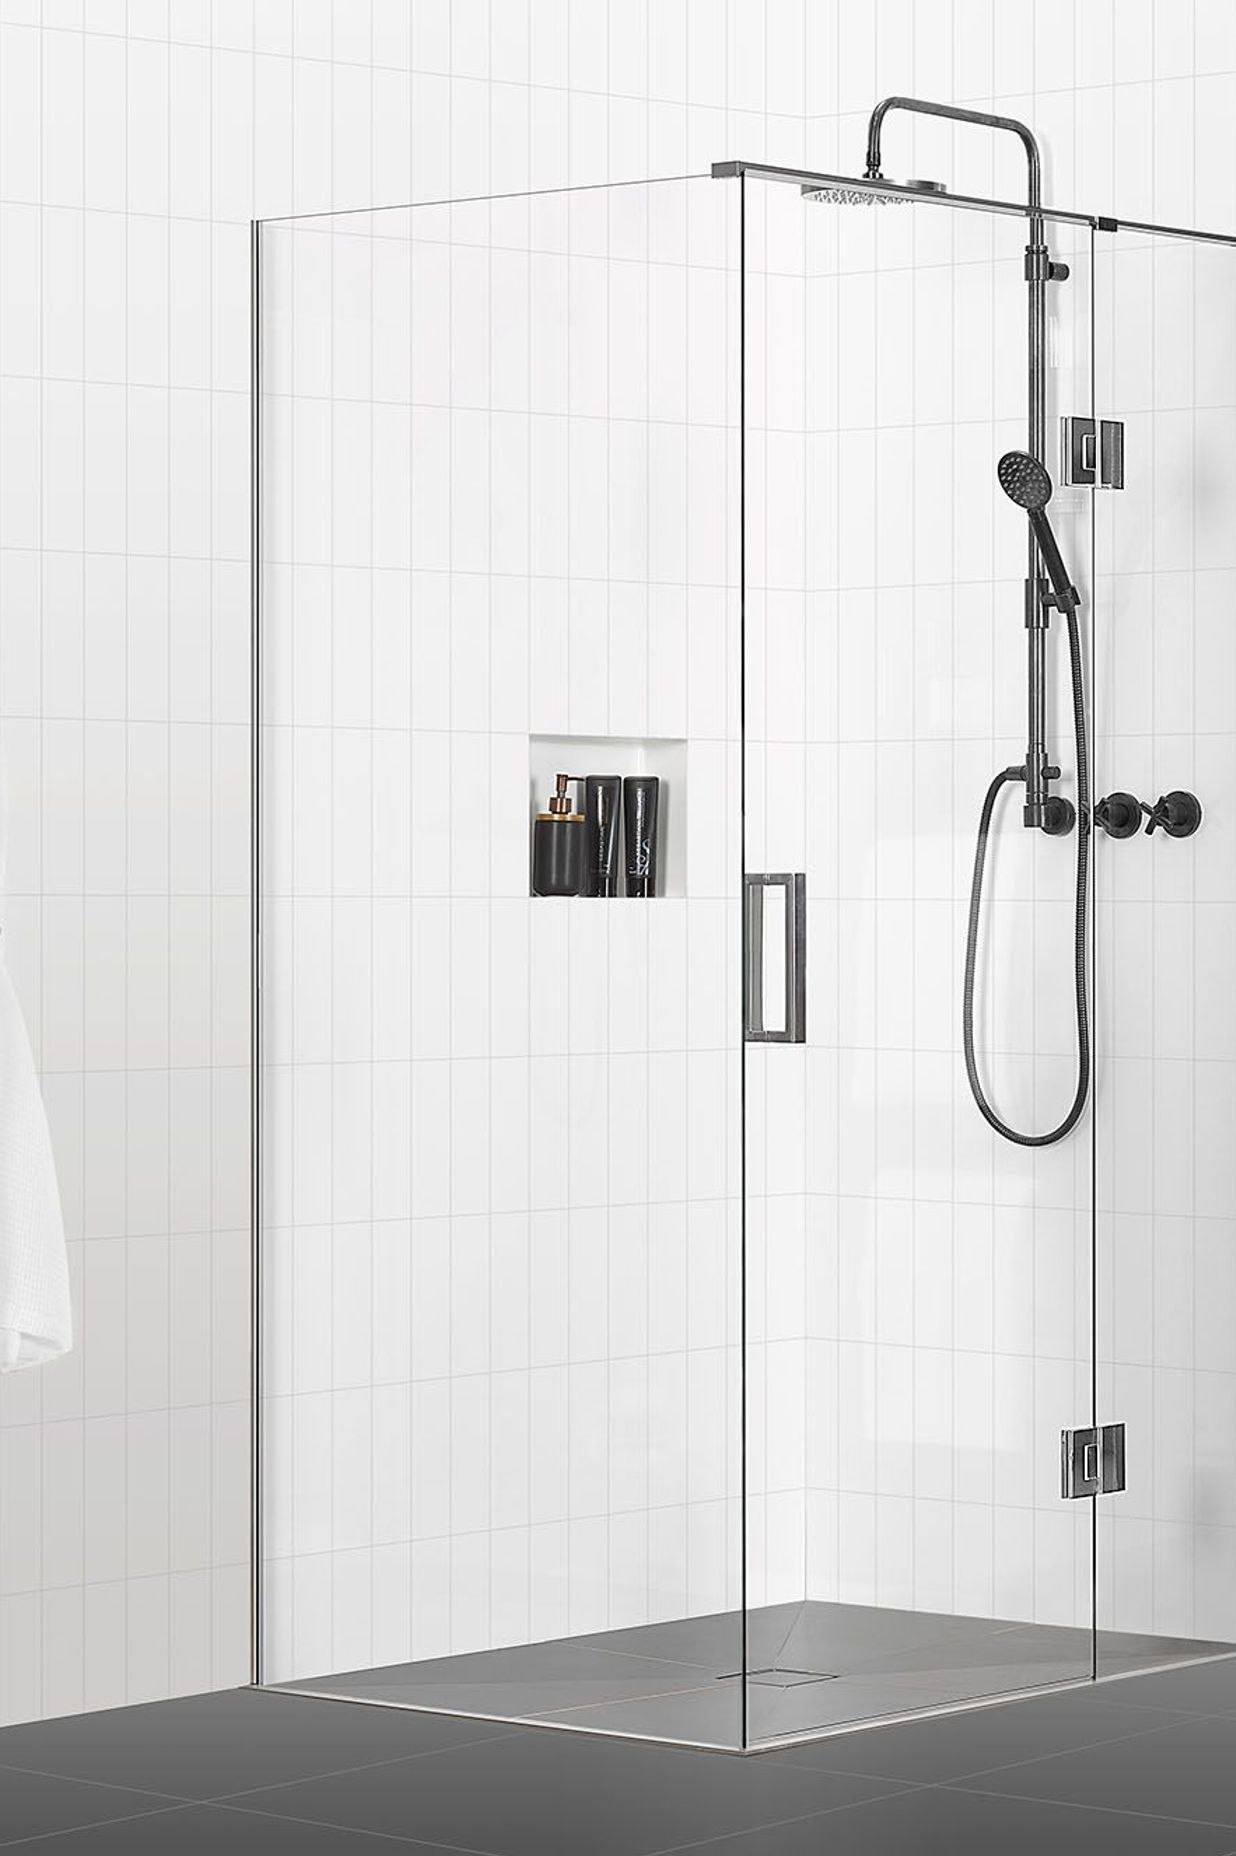 The tray has been designed to be integrated with the full range of contemporary shower enclosures, or, it can be left open to create a wet area solution.